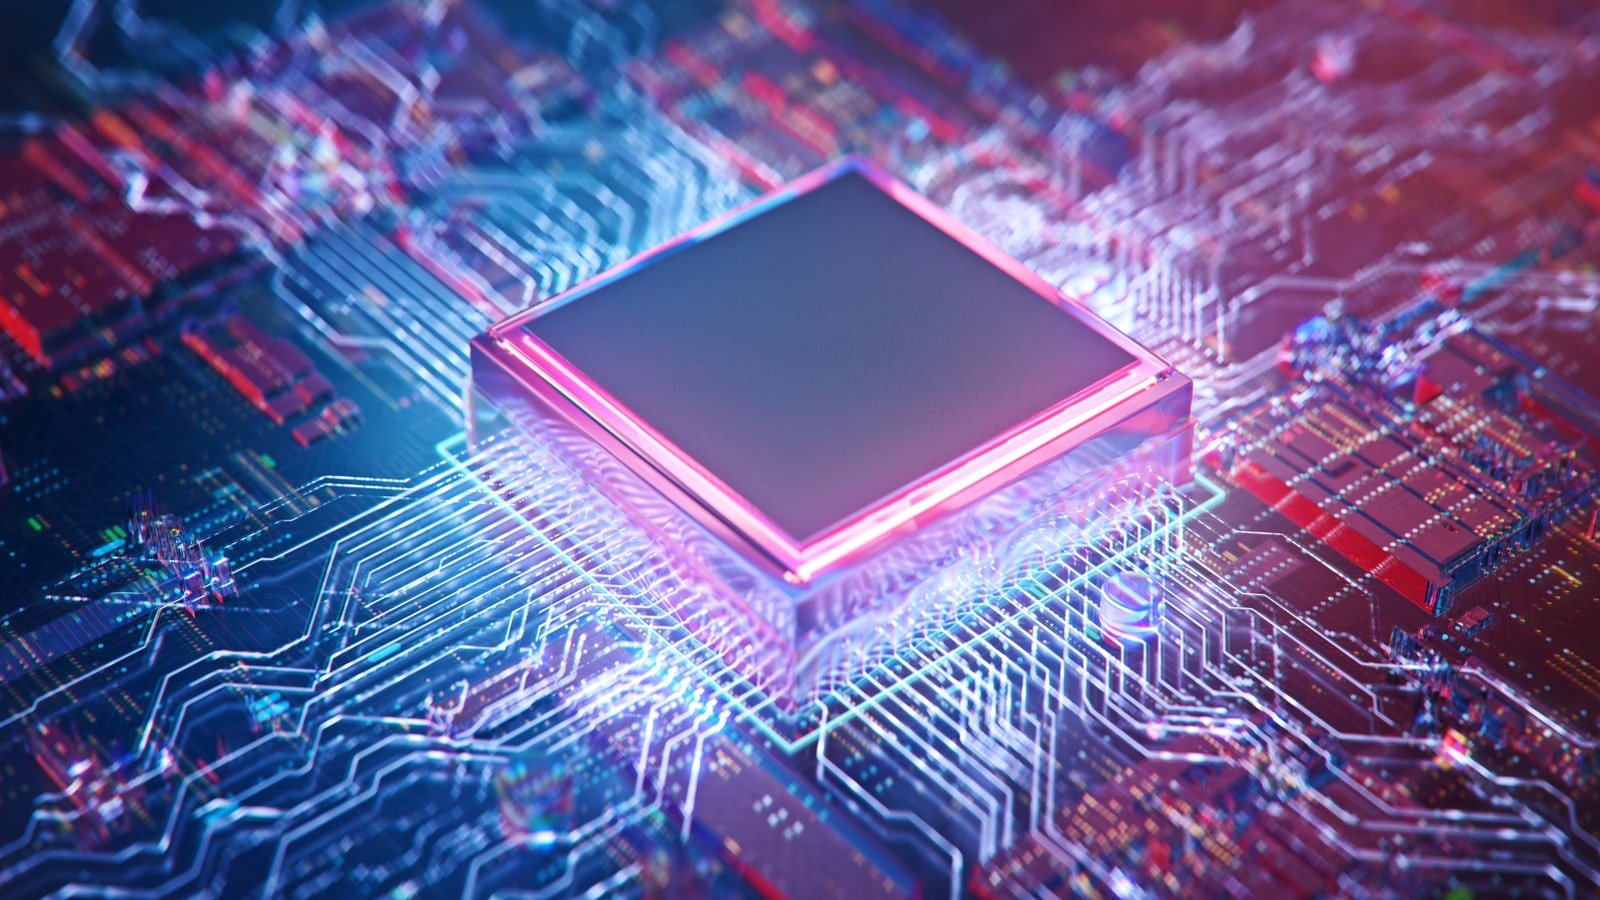 Chip Stocks. AI. Circuit board. Technology background. Central Computer Processors CPU concept. Motherboard digital chip. Tech science background. Integrated communication processor. 3D illustration representing semiconductor stocks